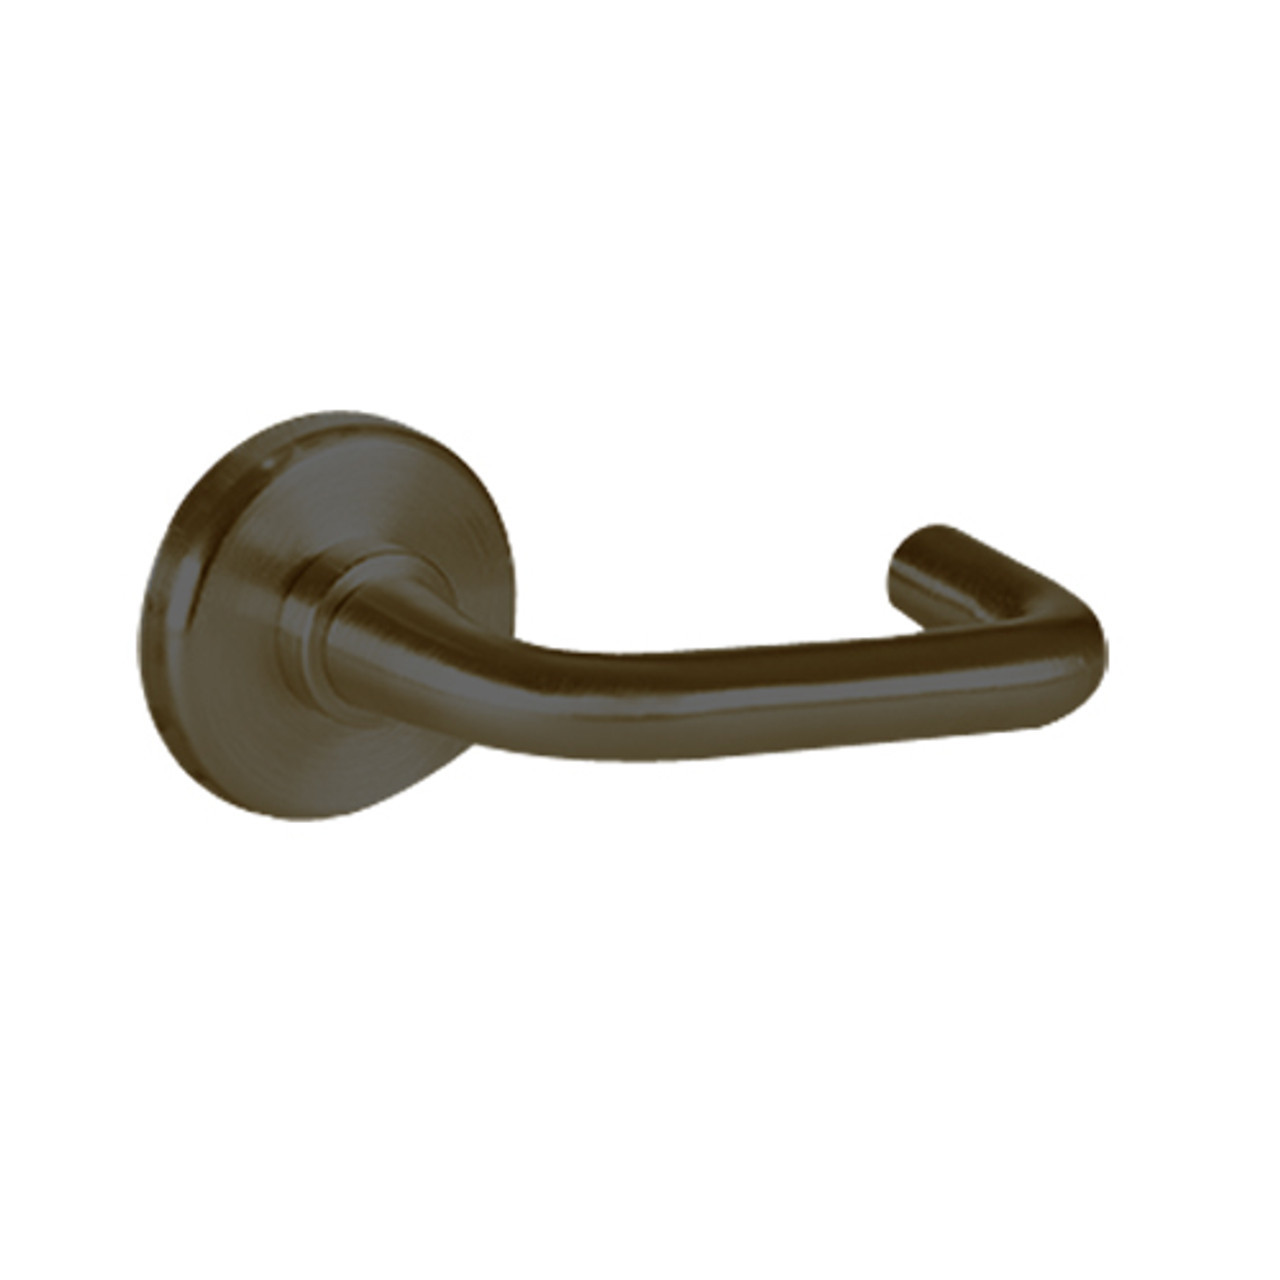 45HW7DEU3S613RQE12V Best 40HW series Single Key Latch Fail Secure Electromechanical Mortise Lever Lock with Solid Tube w/ Return Style in Oil Rubbed Bronze